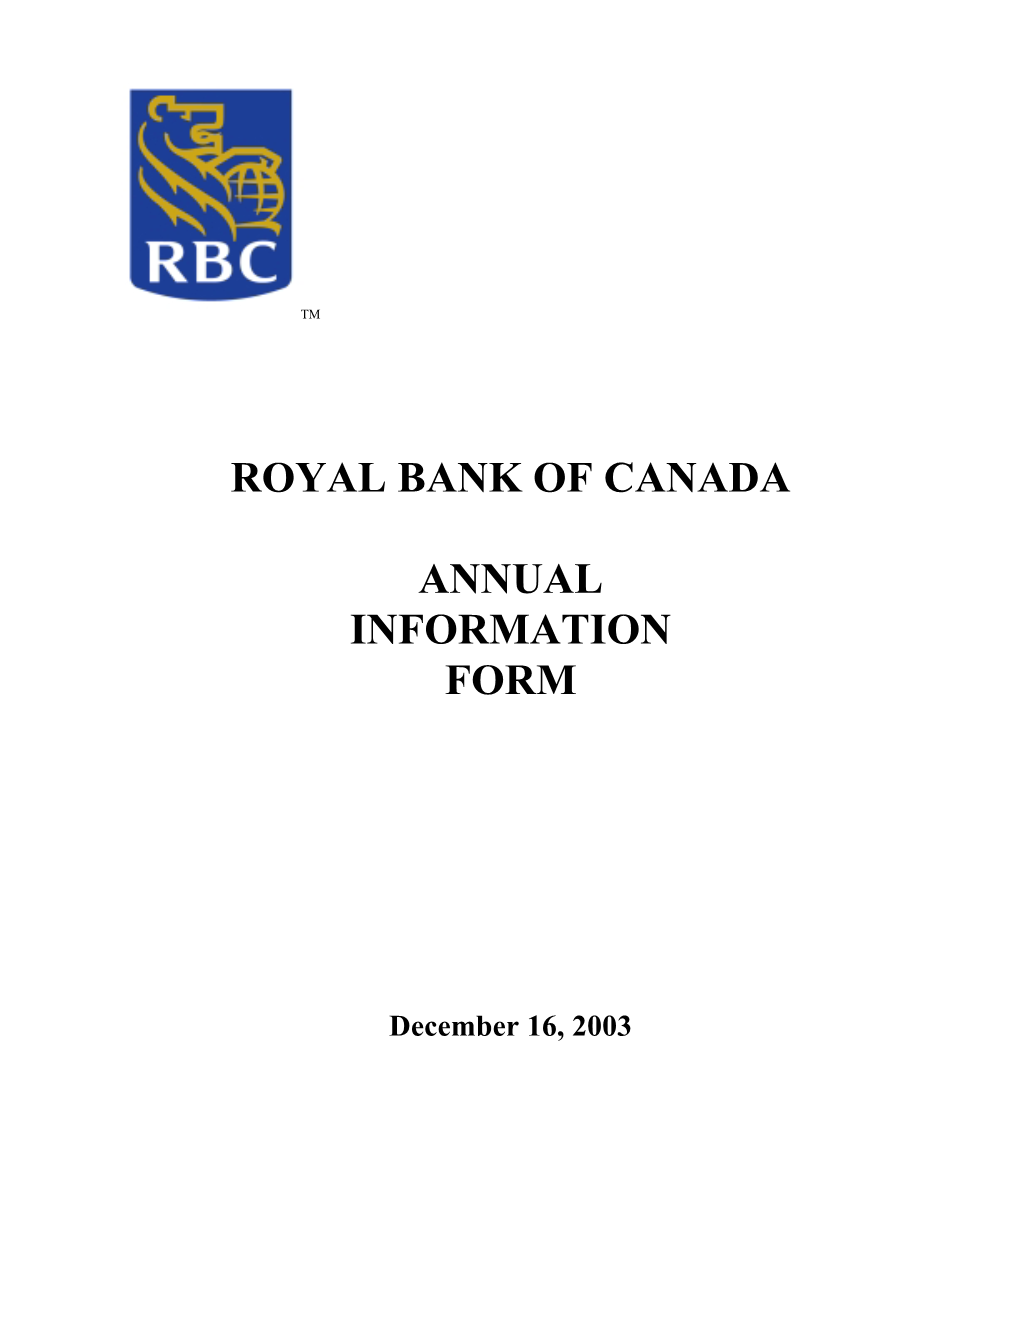 Royal Bank of Canada Annual Information Form